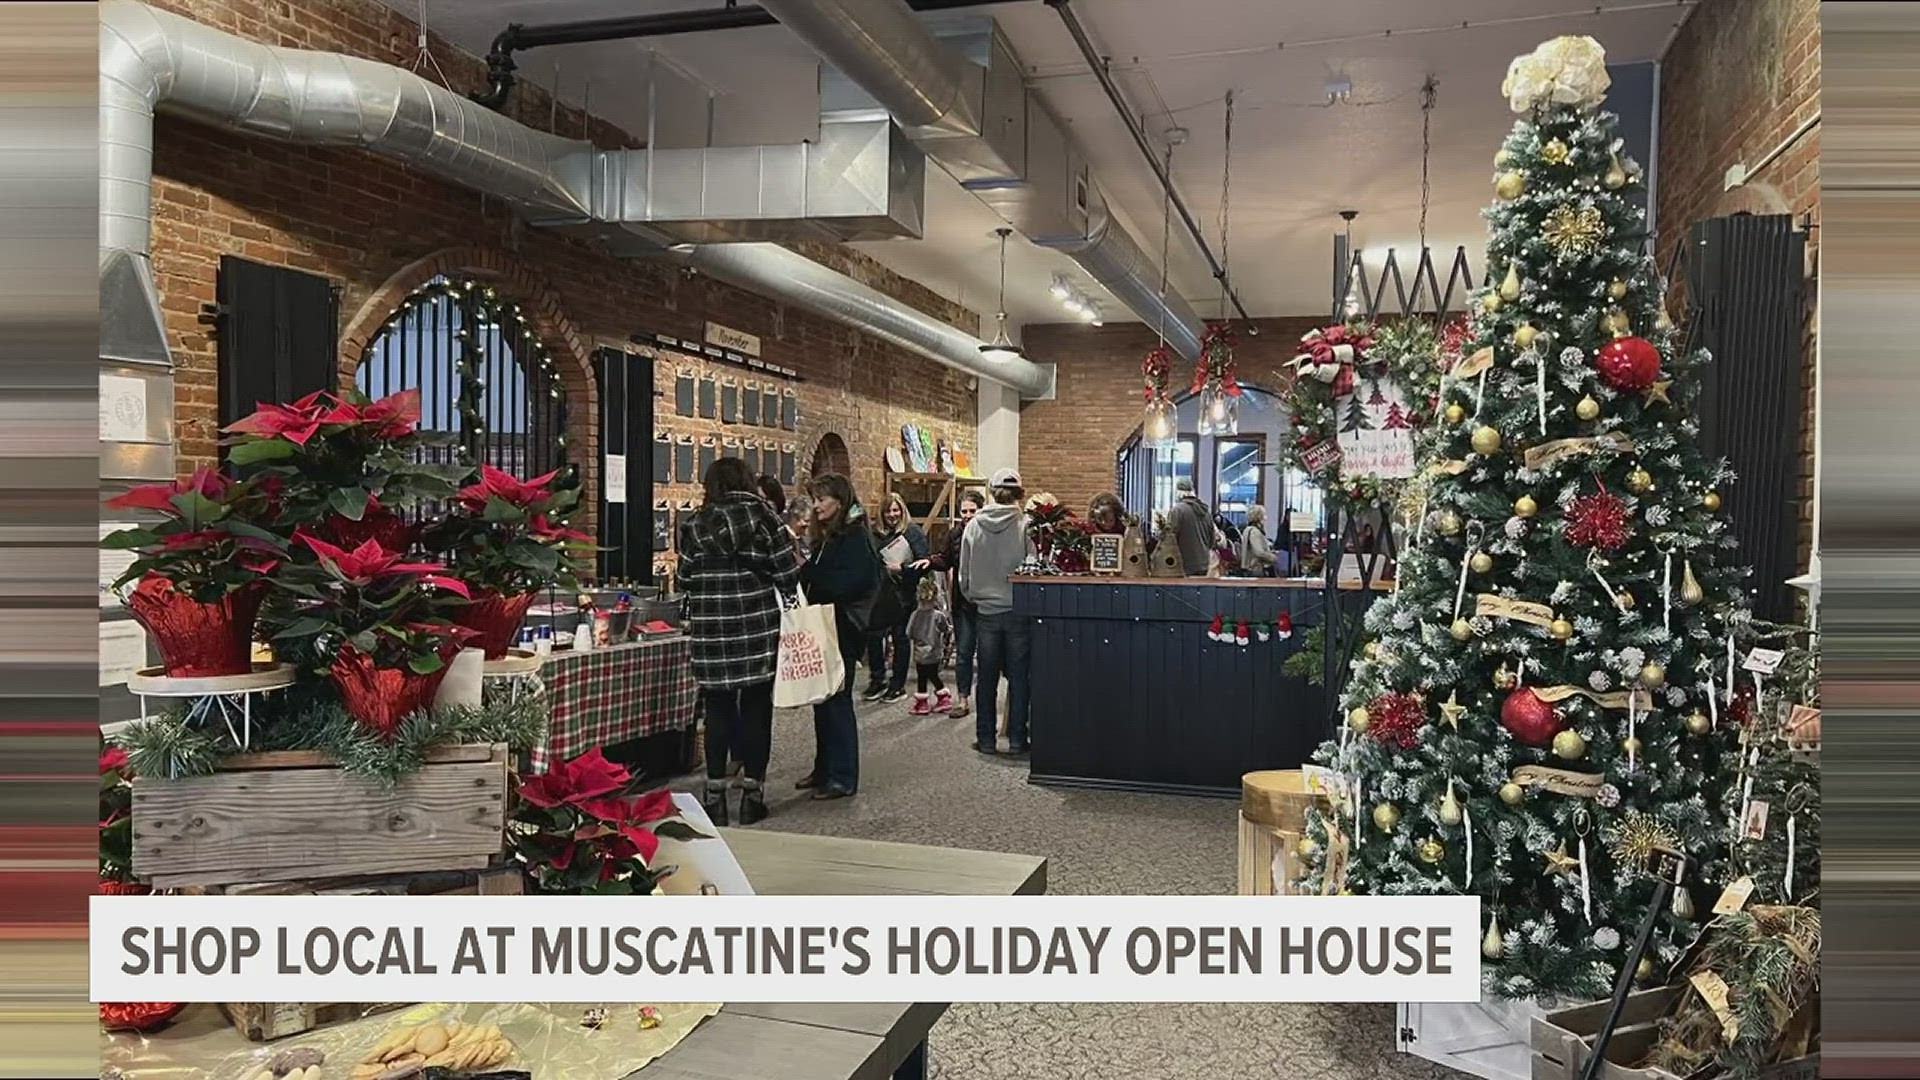 Create DIY Craft Studio joins The Current to discuss a day of special deals, refreshments and live music at 25 Muscatine stores for the annual Holiday Open House.